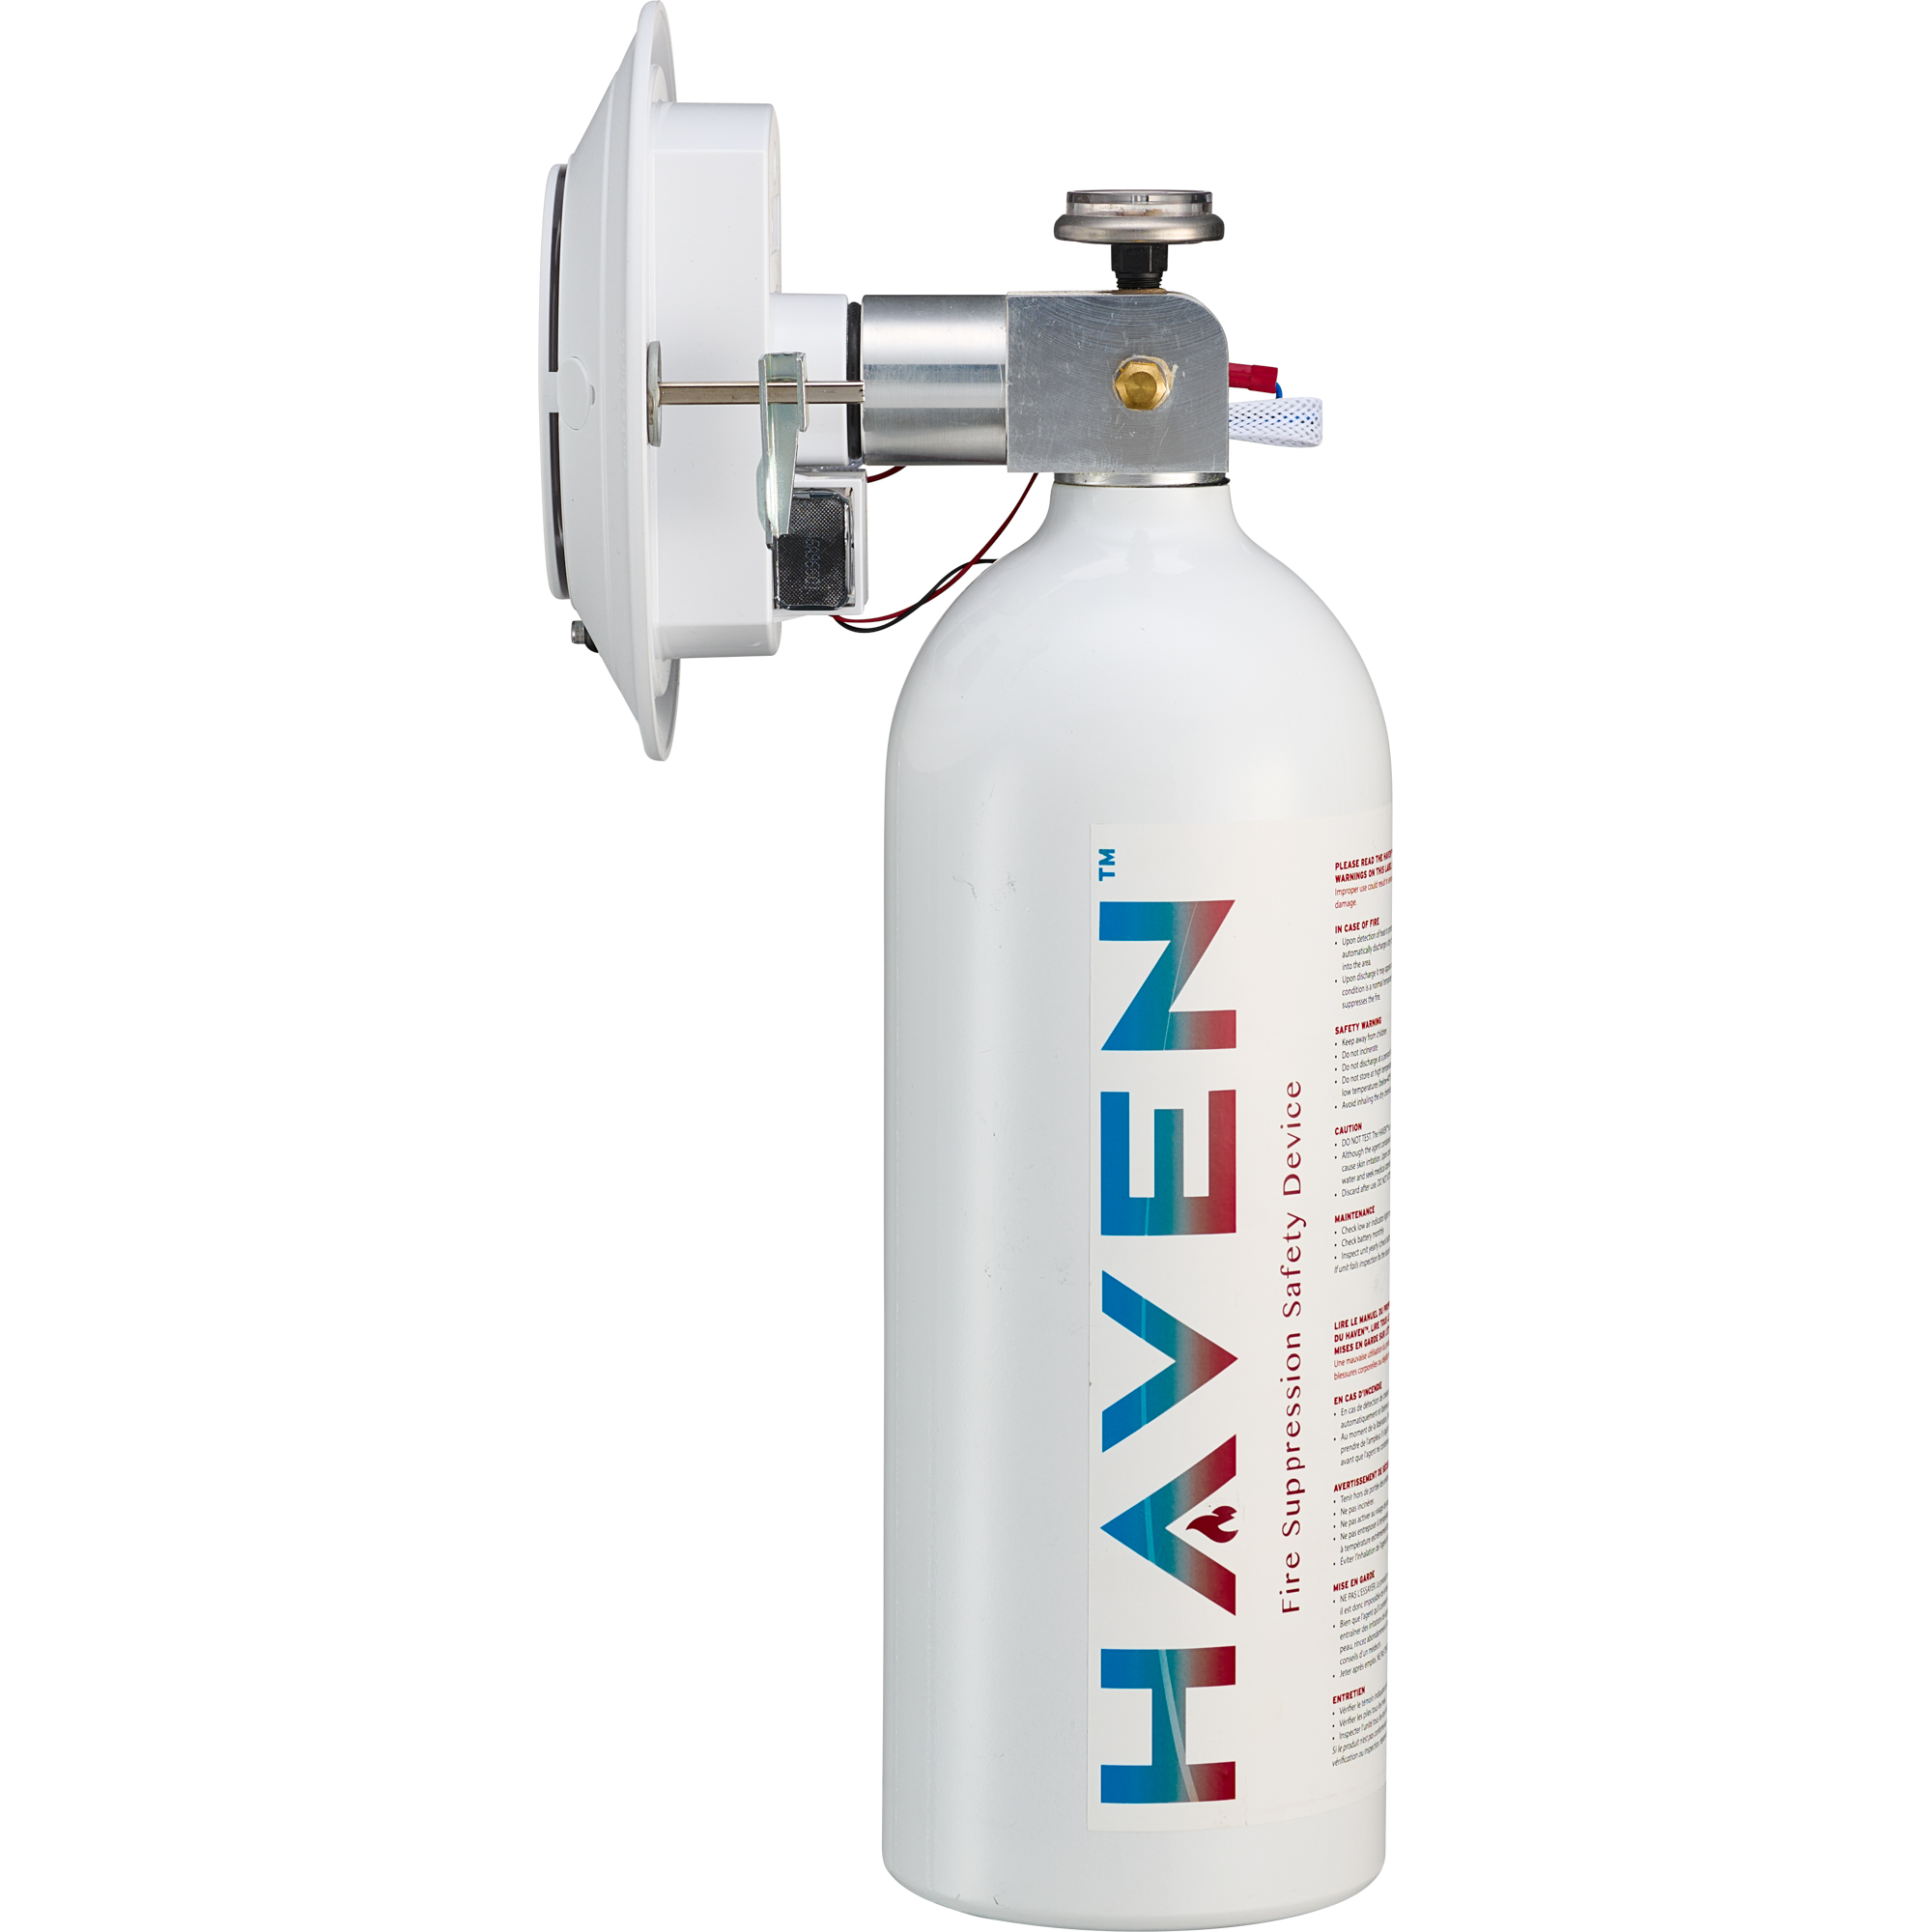 HAVEN 5lb Fire Suppression Safety Device 155F - 68C Rated